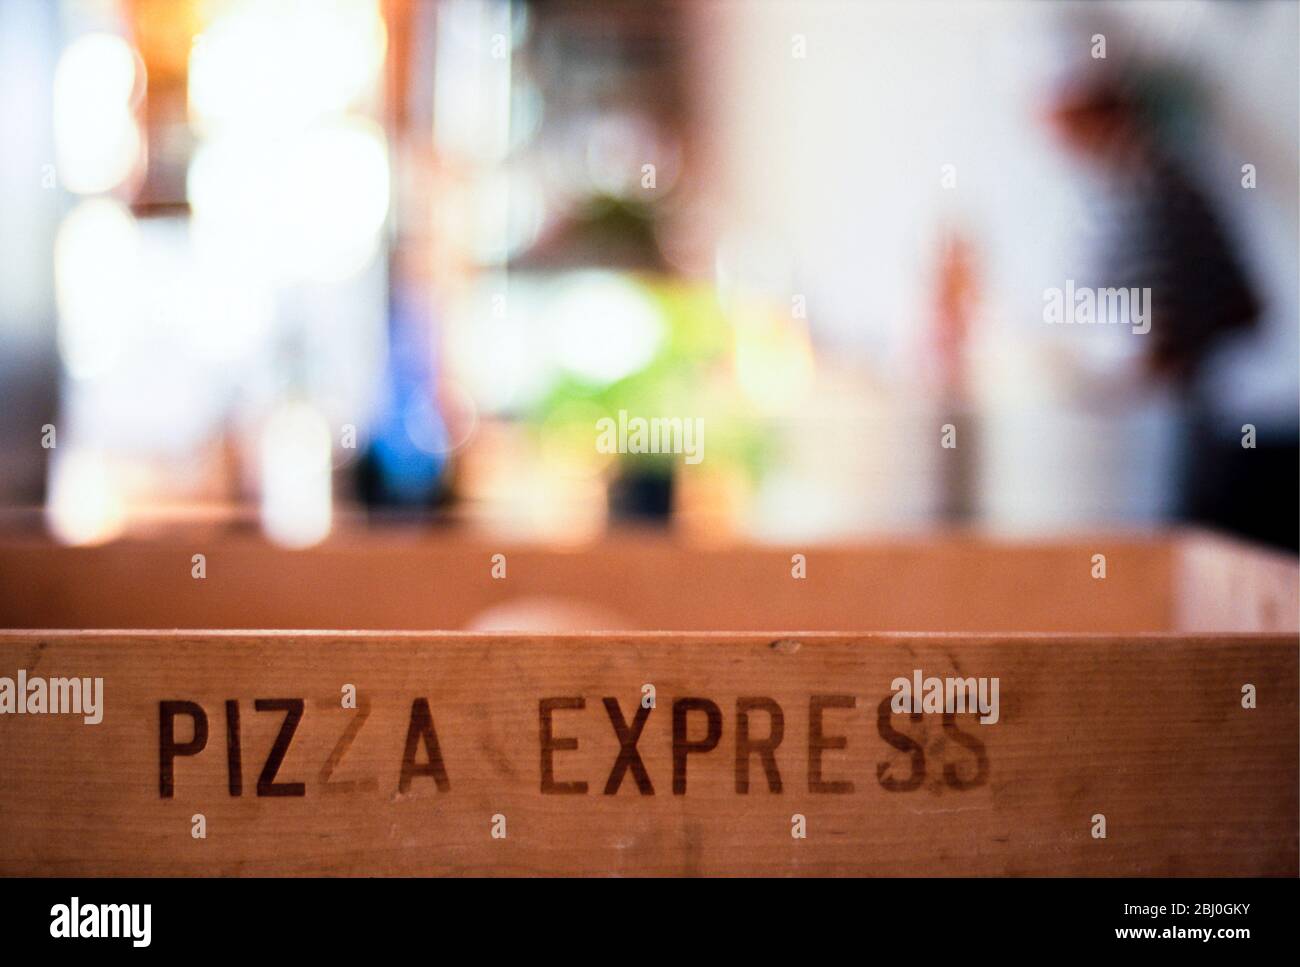 Interior of Pizza Express restaurant showing labelled wooden delivery box and blurred figures and details in the background - Stock Photo